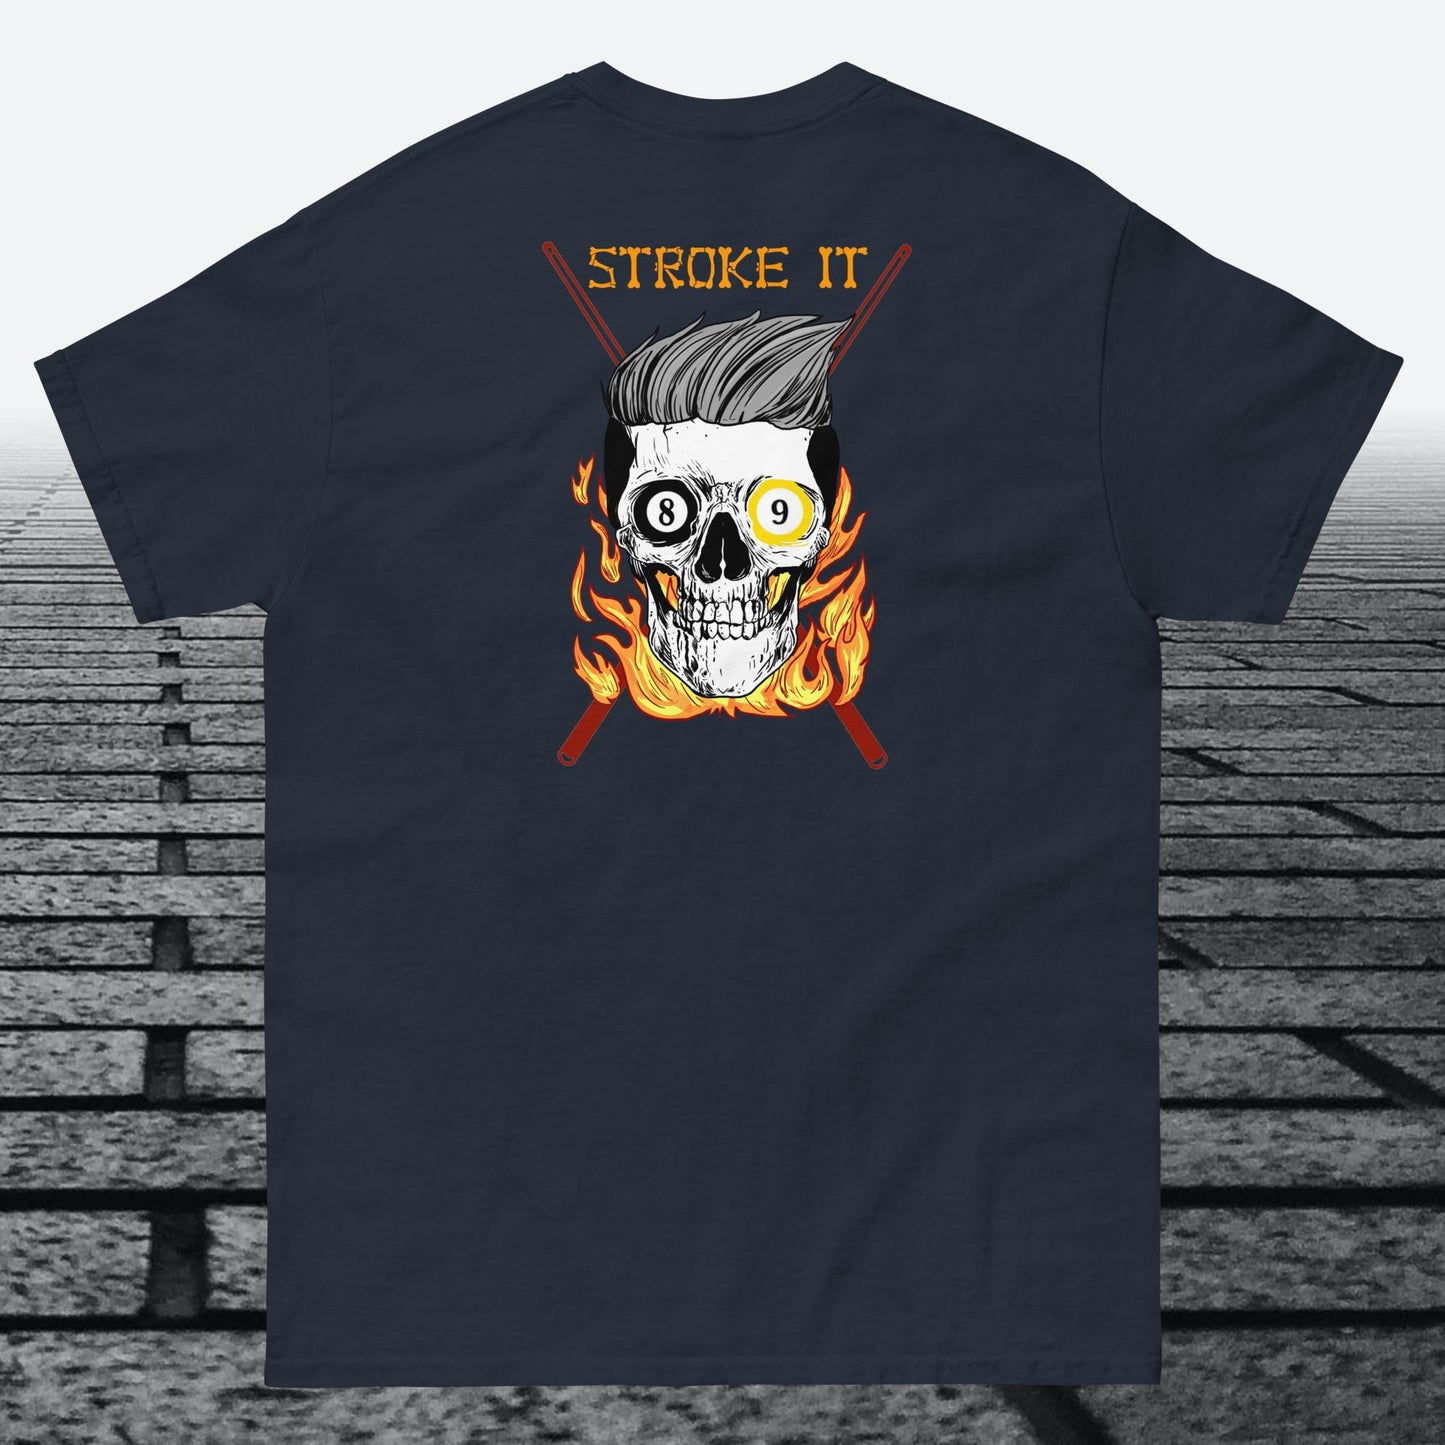 Felt Up, with Stroke it on the back, Cotton t-shirt